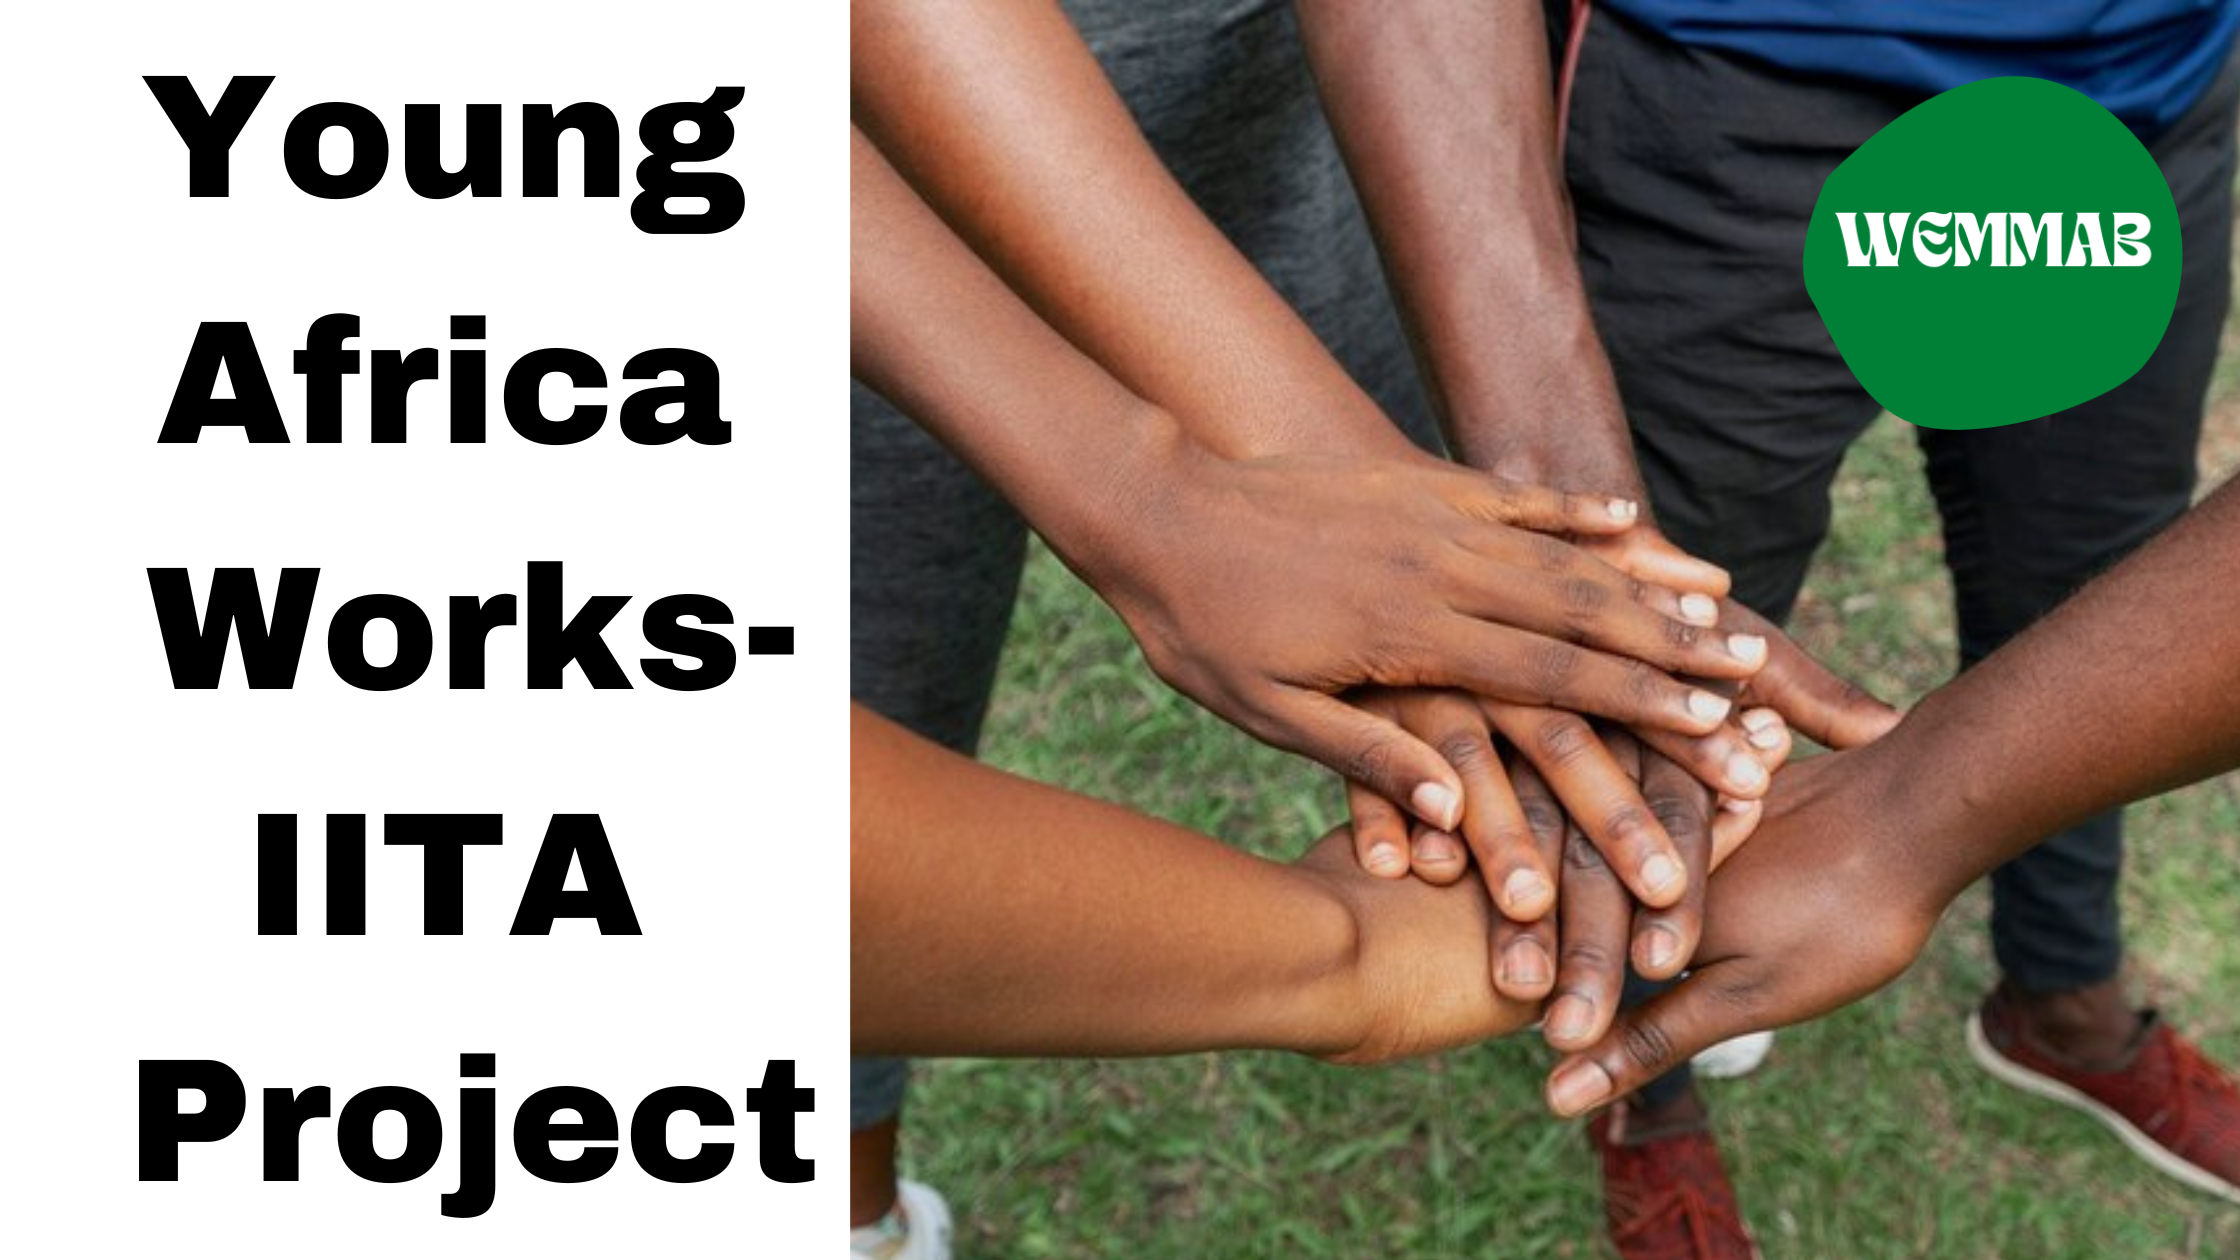 The Young Africa Works-IITA project- Employment and Entrepreneurship